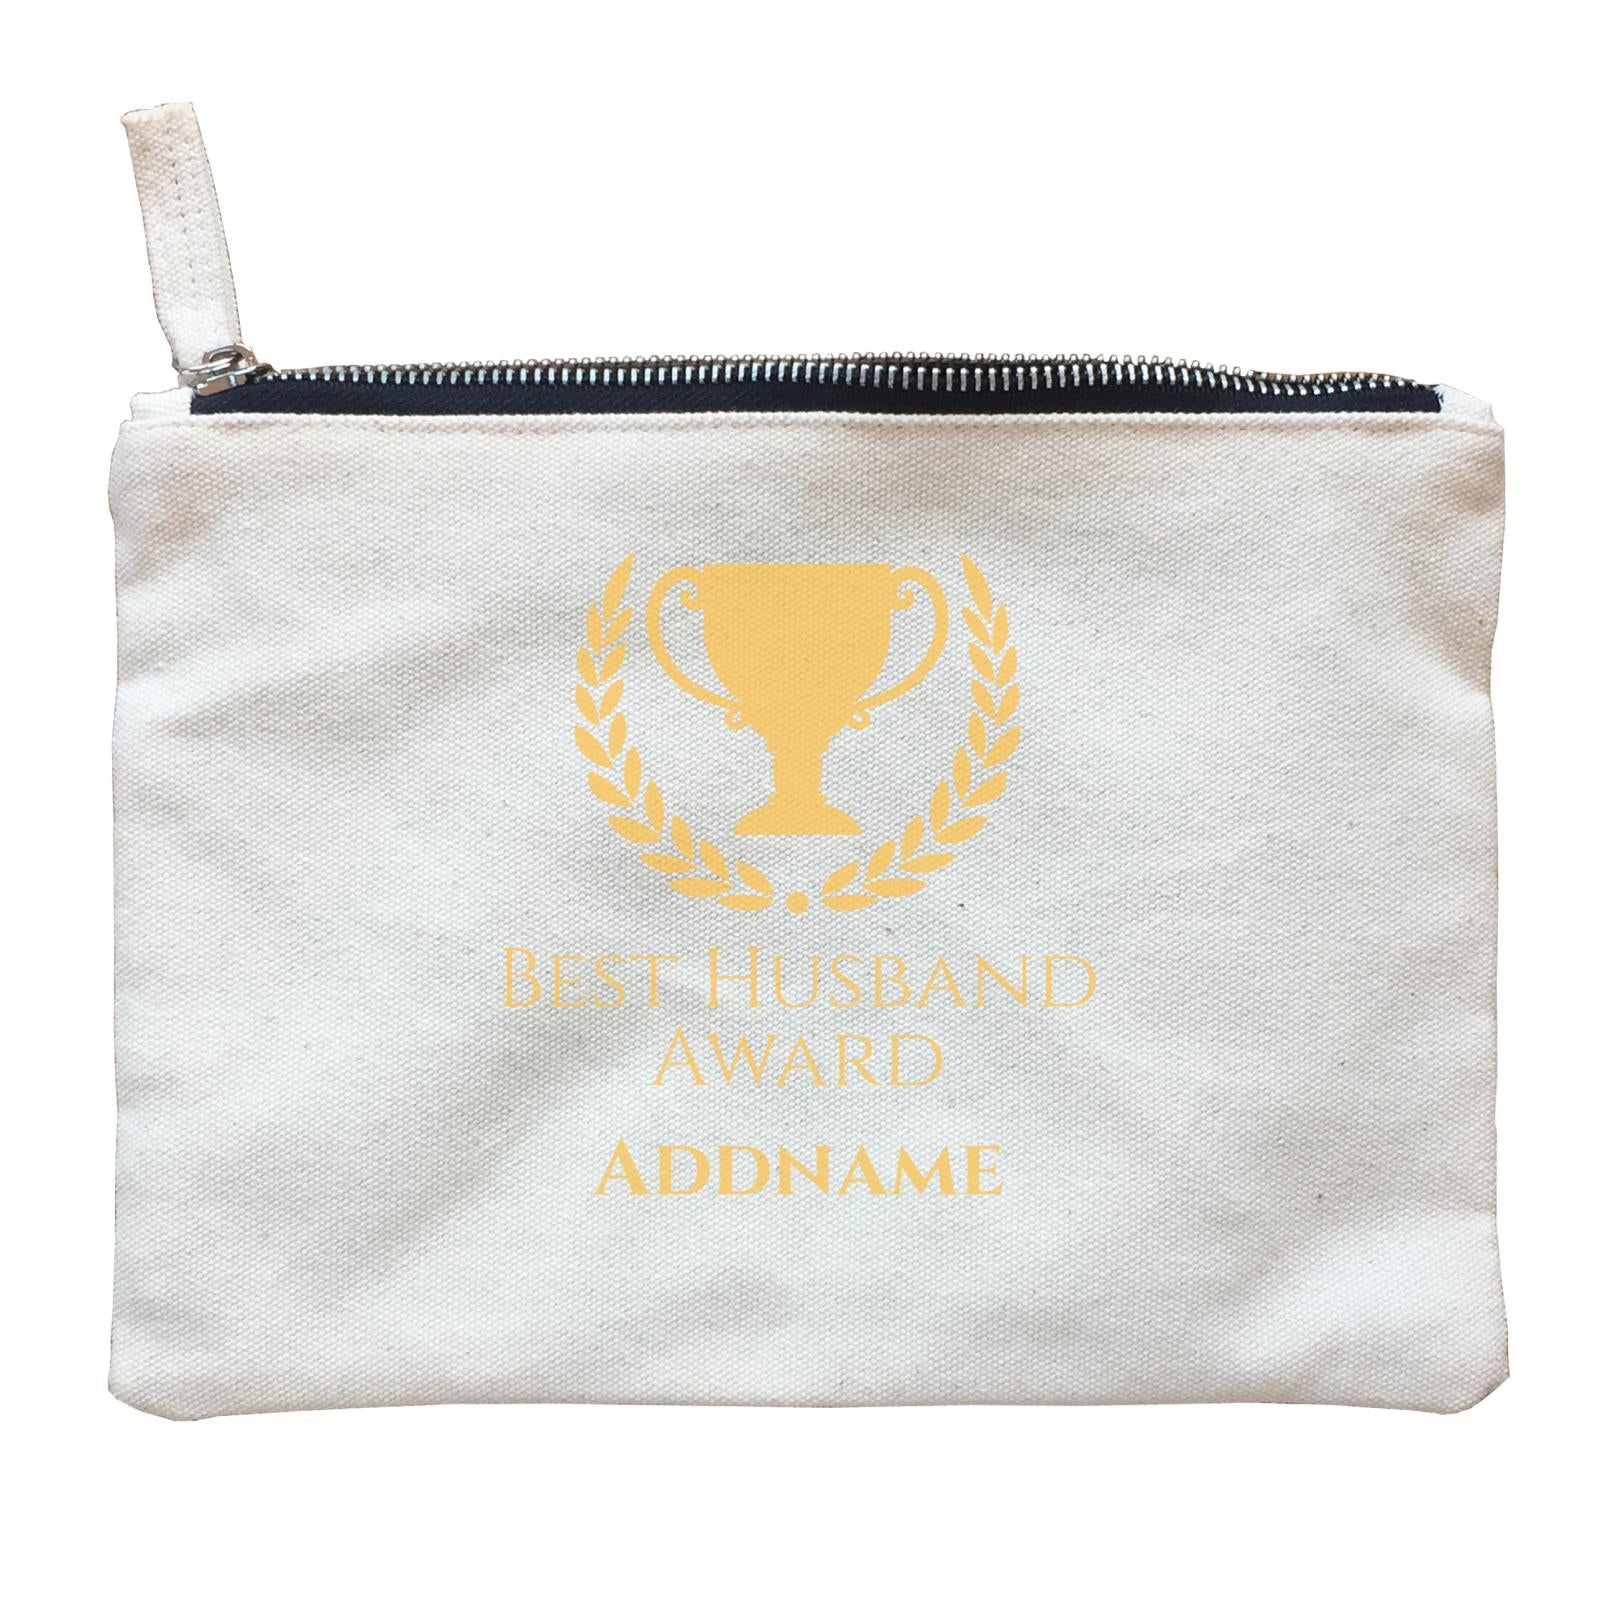 Husband and Wife Trophy Best Husband Award Addname Zipper Pouch